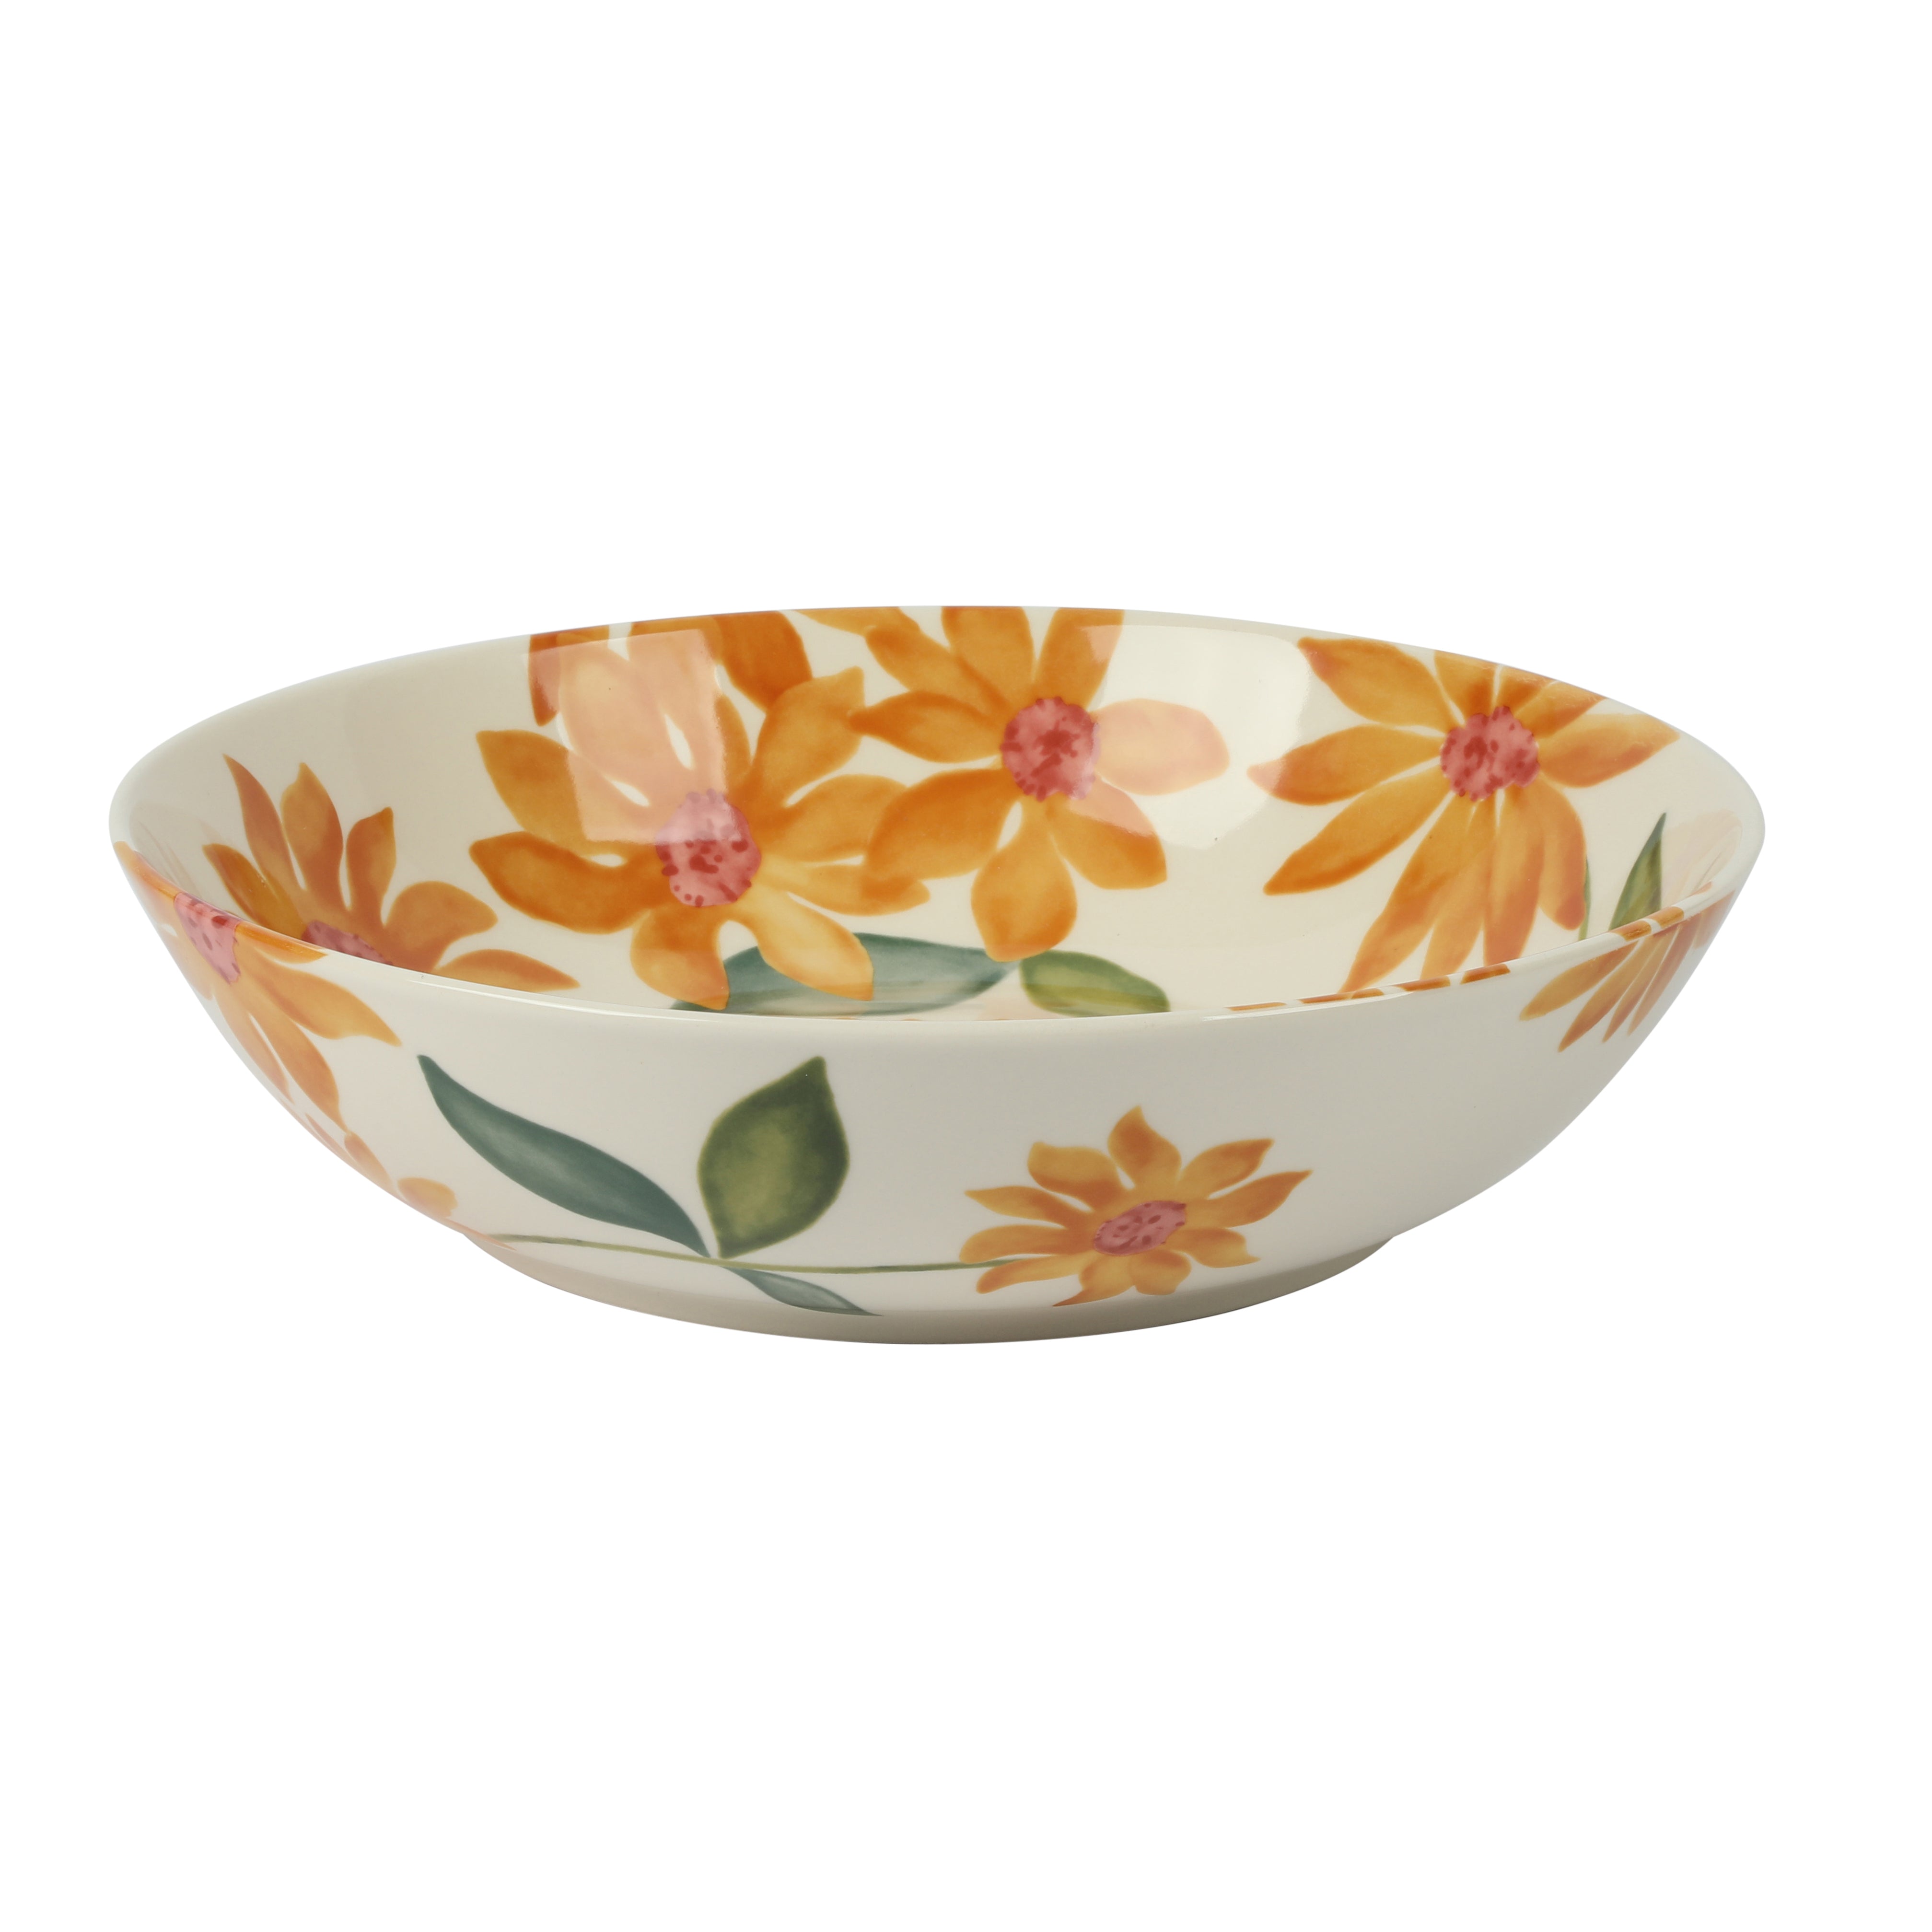 Bloomhouse Sunnyflower 2-Piece Hand-Painted Floral Stoneware Serving Set